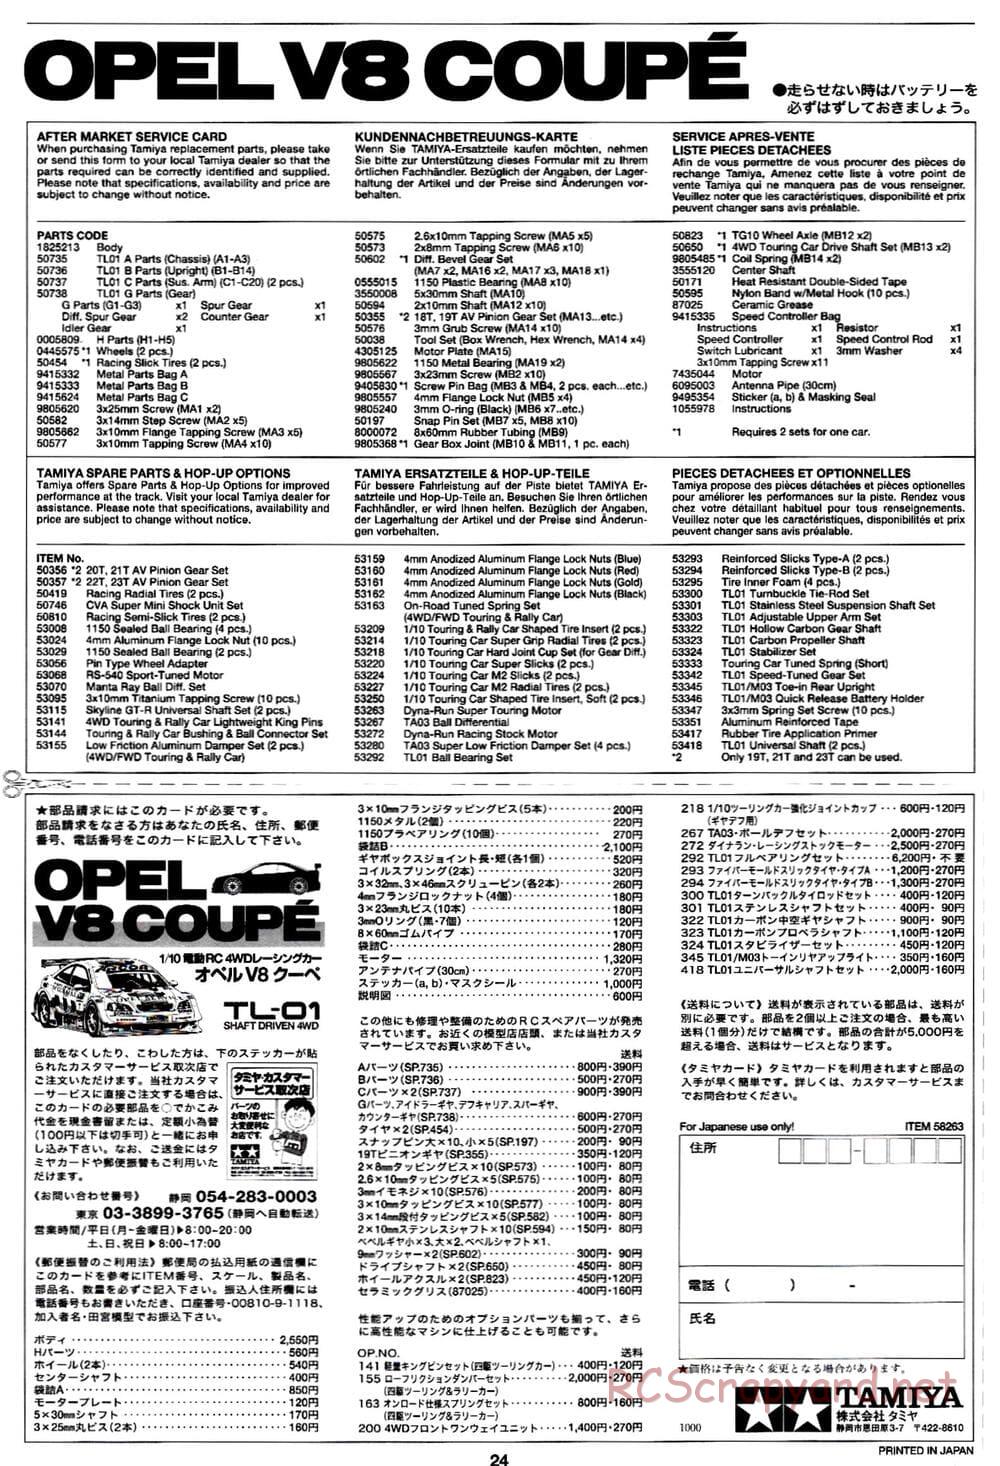 Tamiya - Opel V8 Coupe - TL-01 Chassis - Manual - Page 24